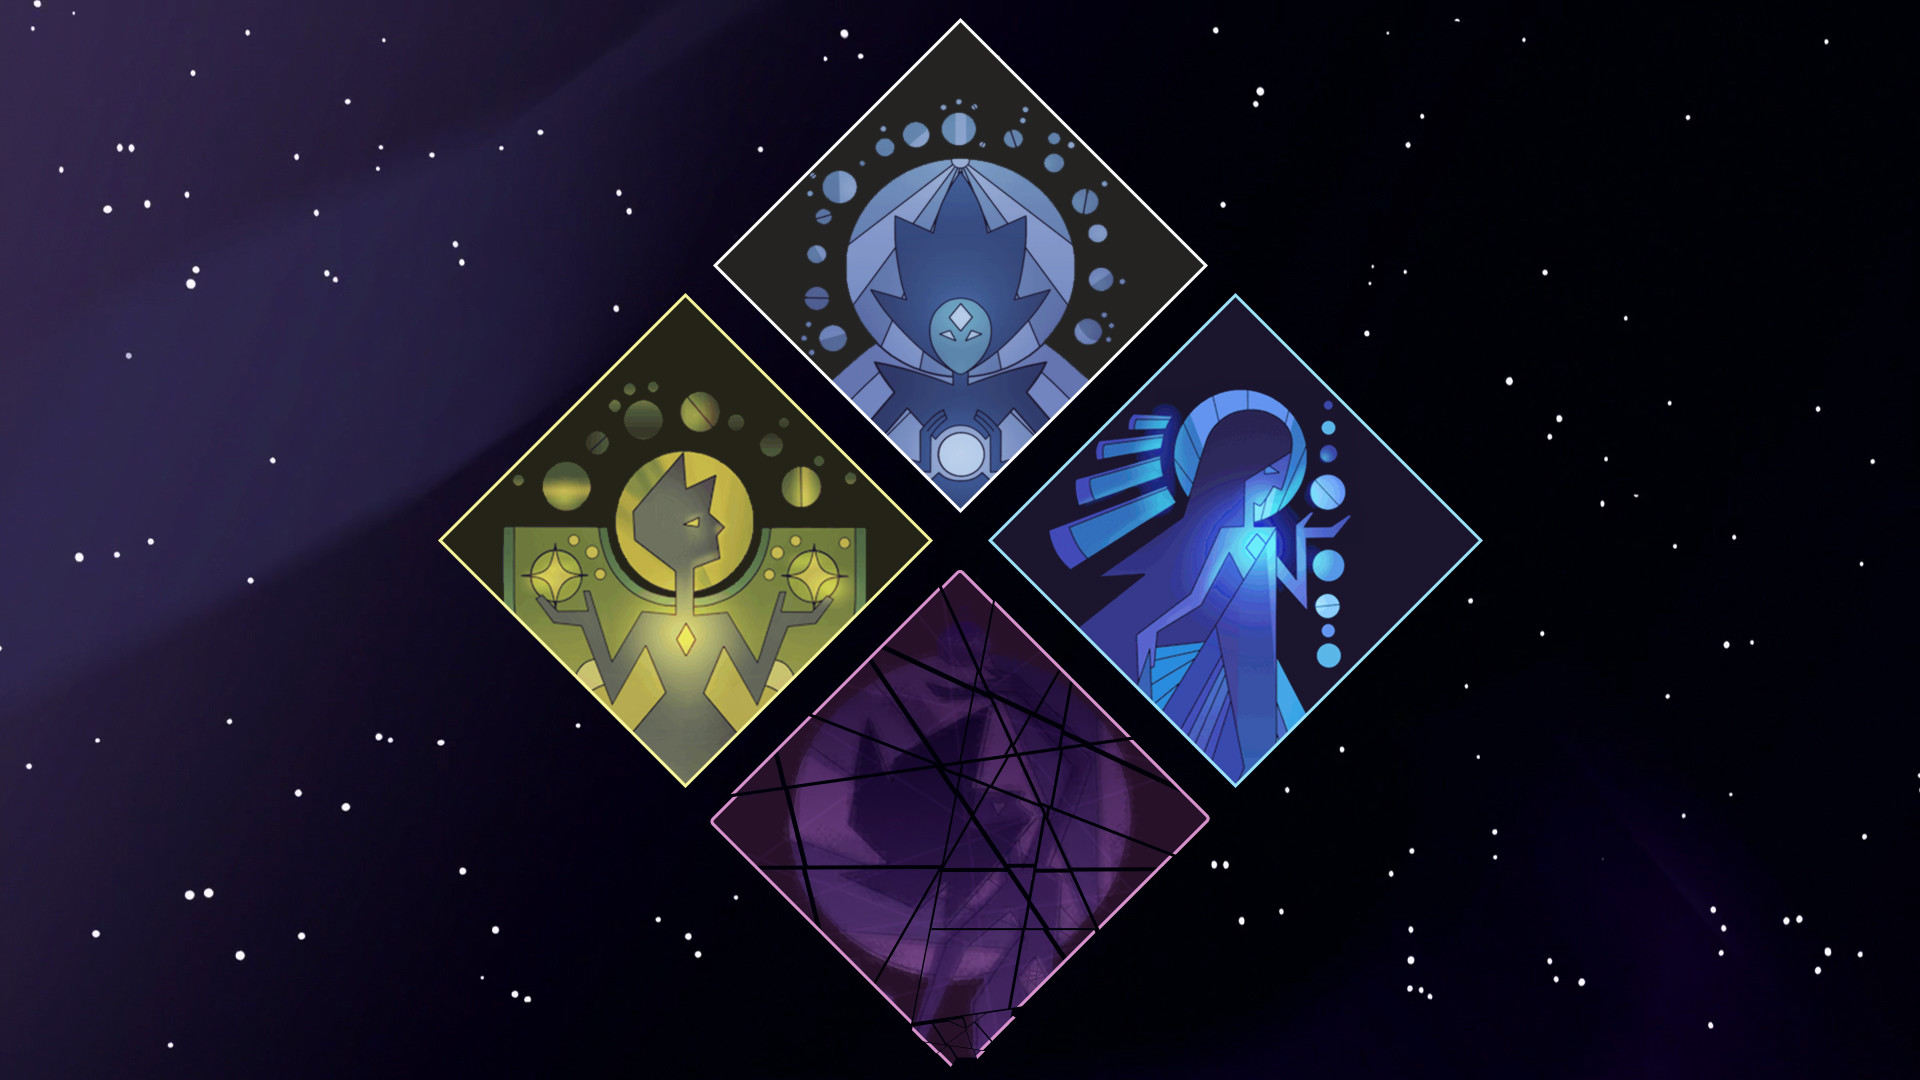 I made a background using The Diamond Authoritys murals within their symbol